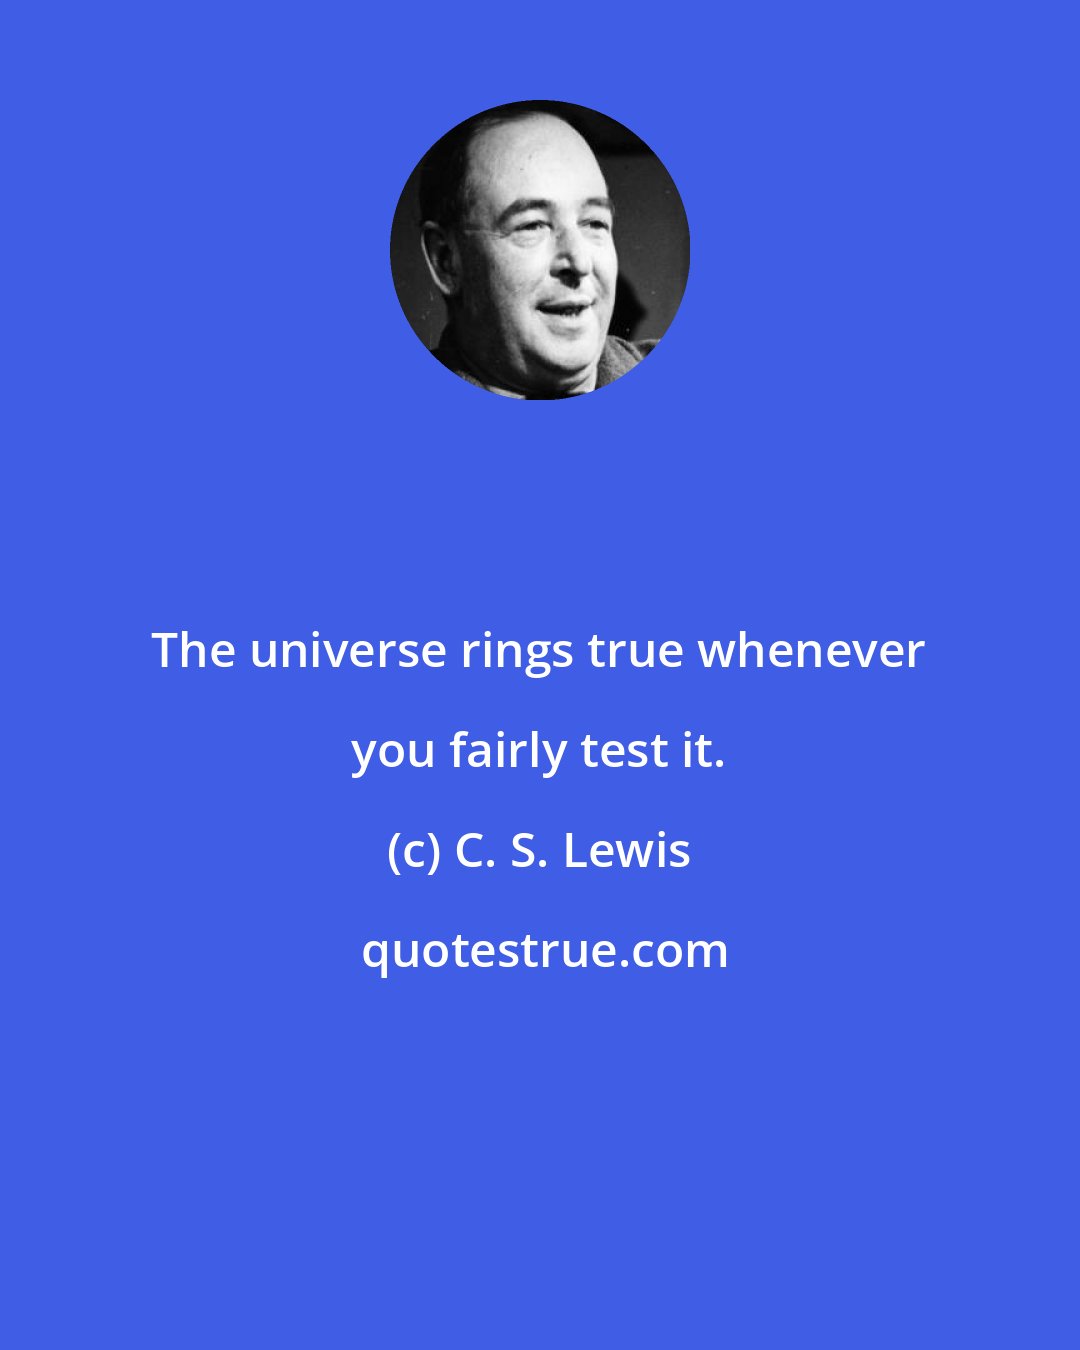 C. S. Lewis: The universe rings true whenever you fairly test it.